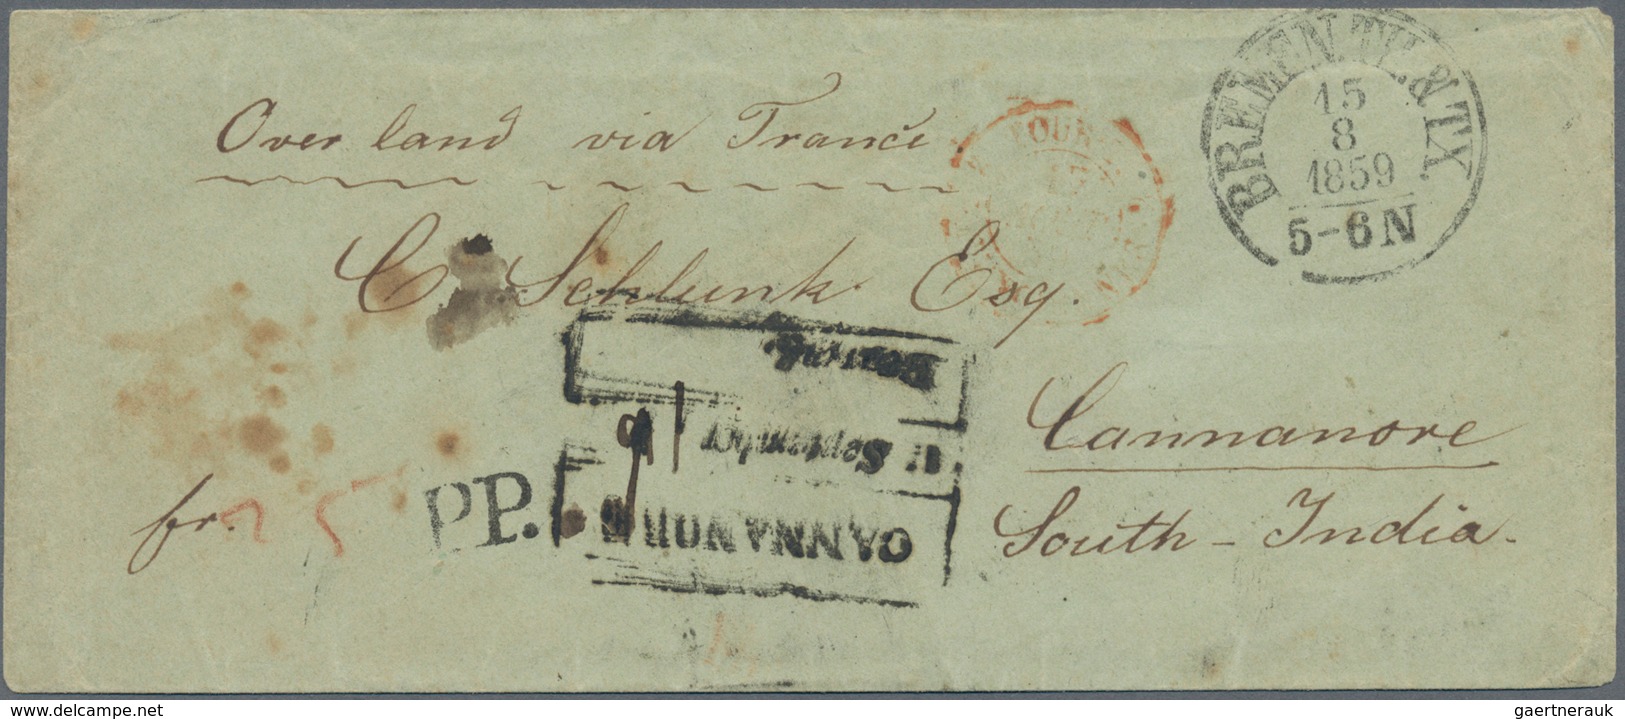 Indien: 1859 Cover From Bremen (T&T P.O.) To CANNANORE Per Overland Mail Via France, Bearing "BREMEN - 1852 Sind Province